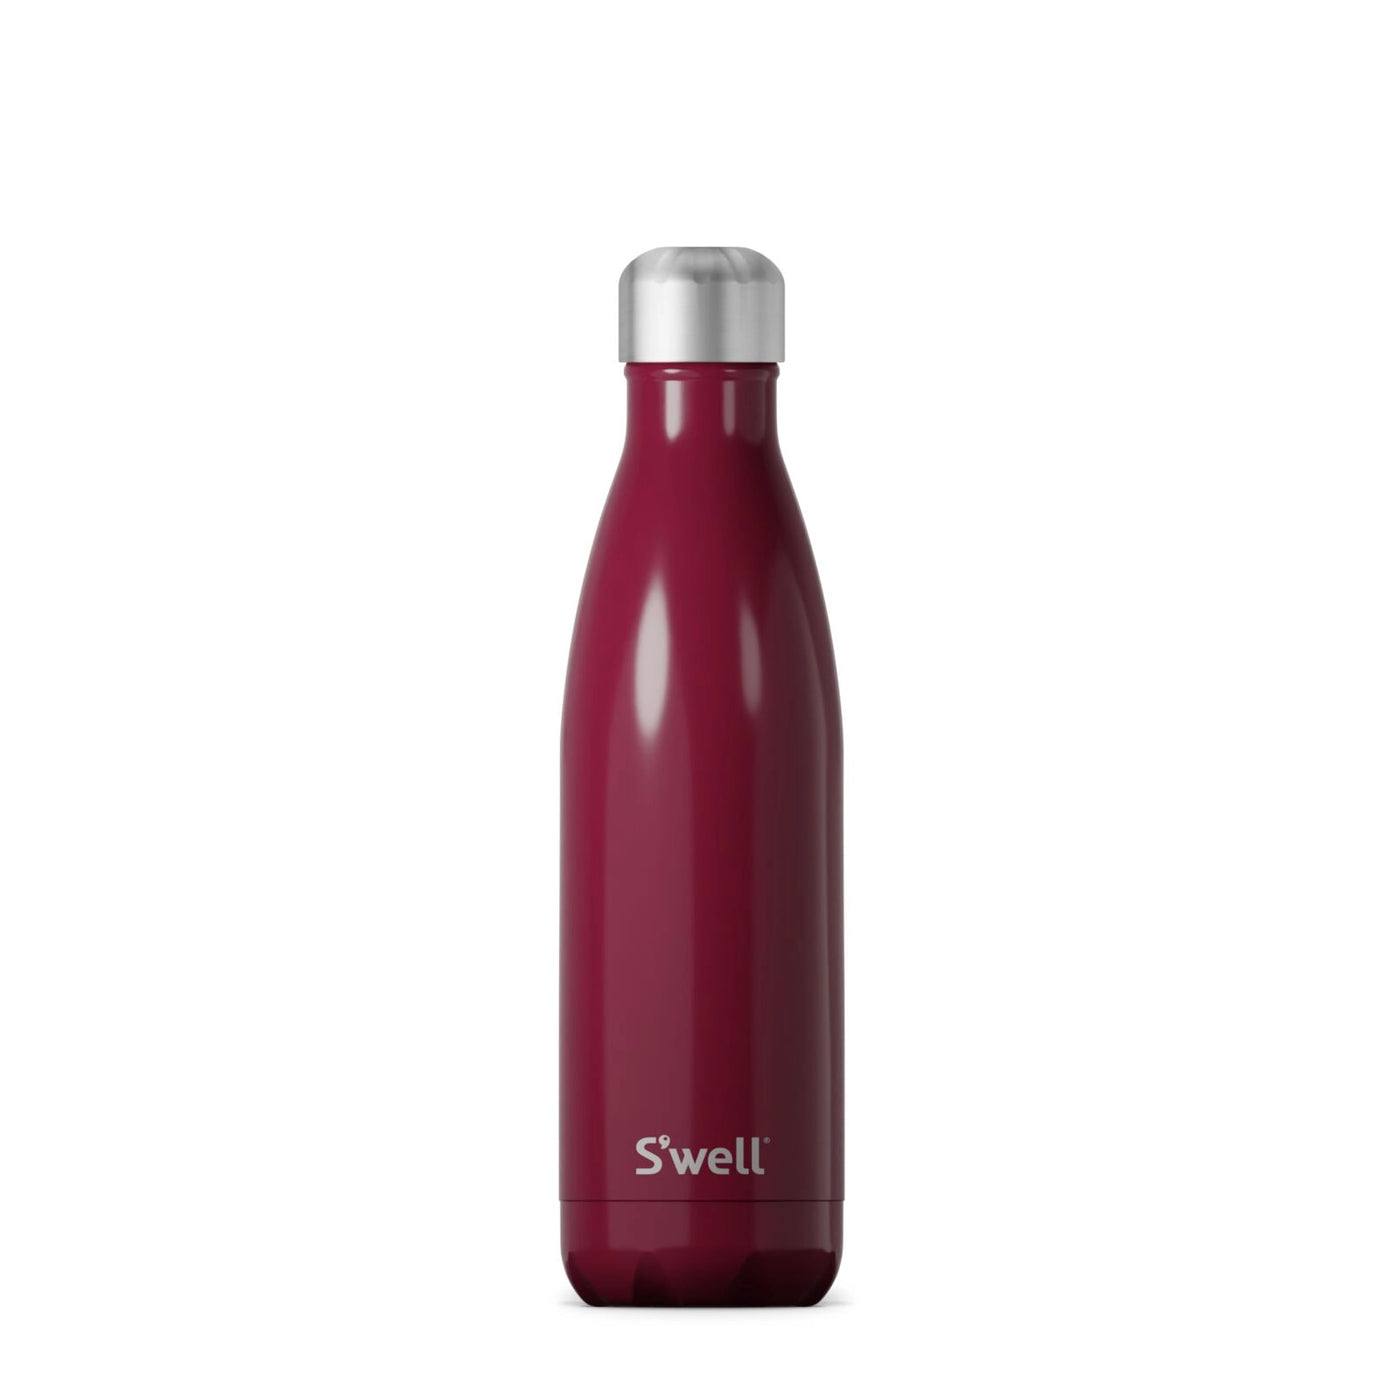 S'well Stainless Steel Water Bottle By S'well